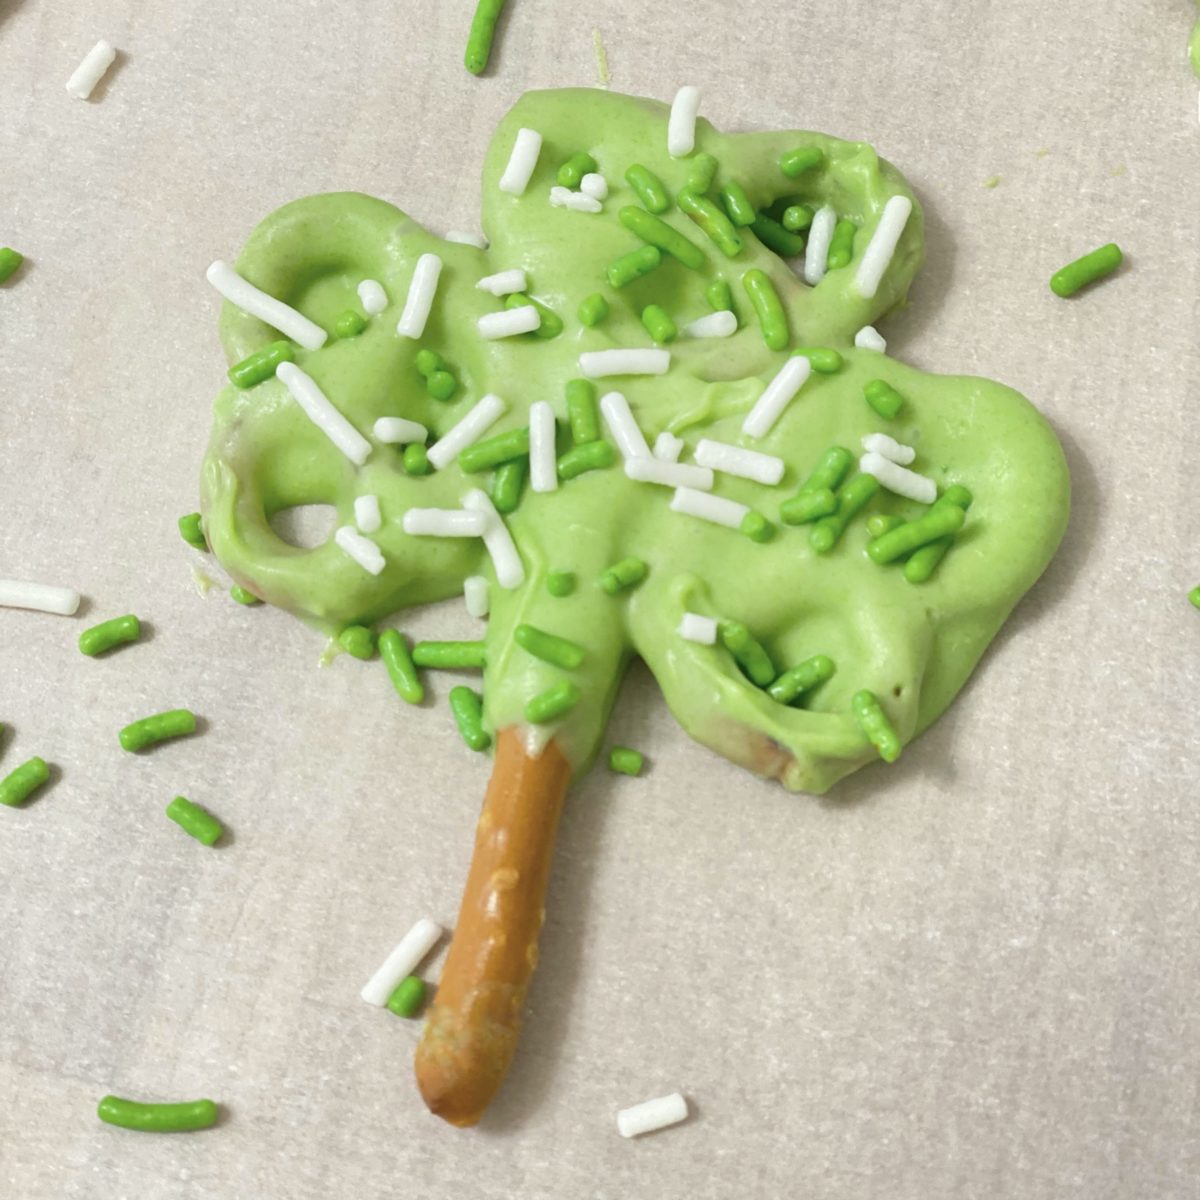 Pretzel shamrock with green chocolate and green and white sprinkles.